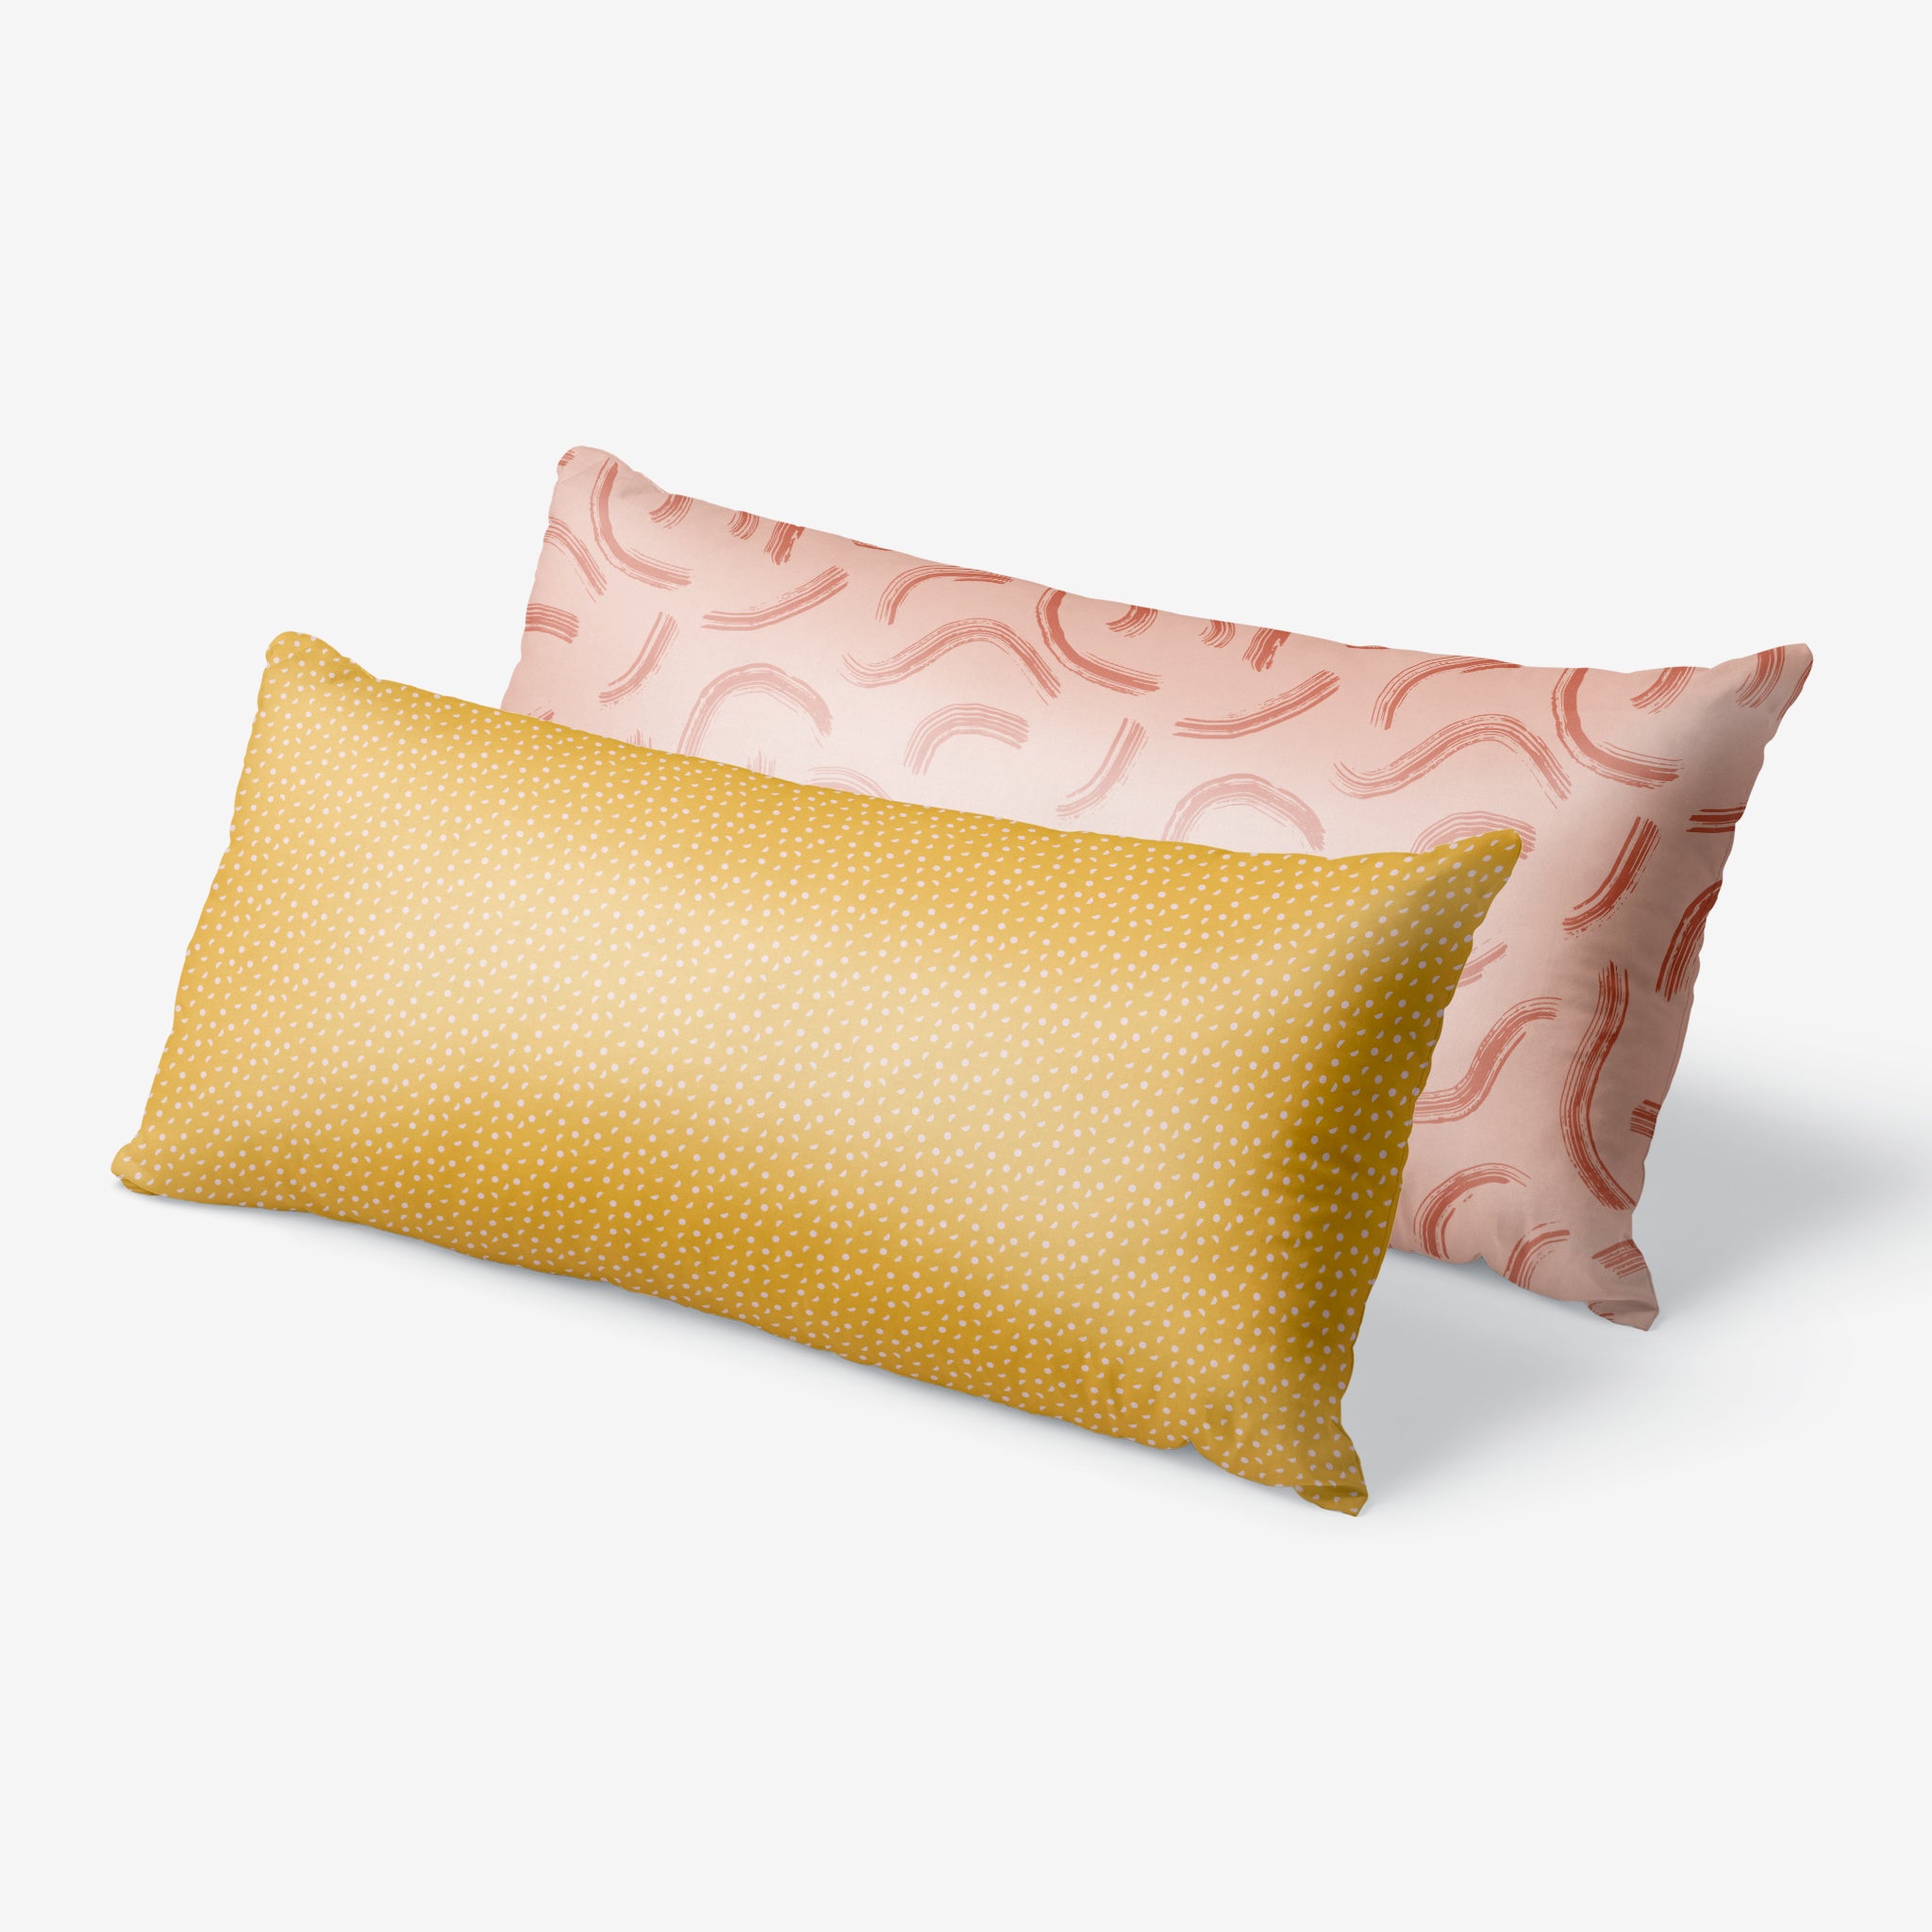 Cocoonzzz Silk Pillowcases - Keep Your Mane Flawless with Cocoonzzz